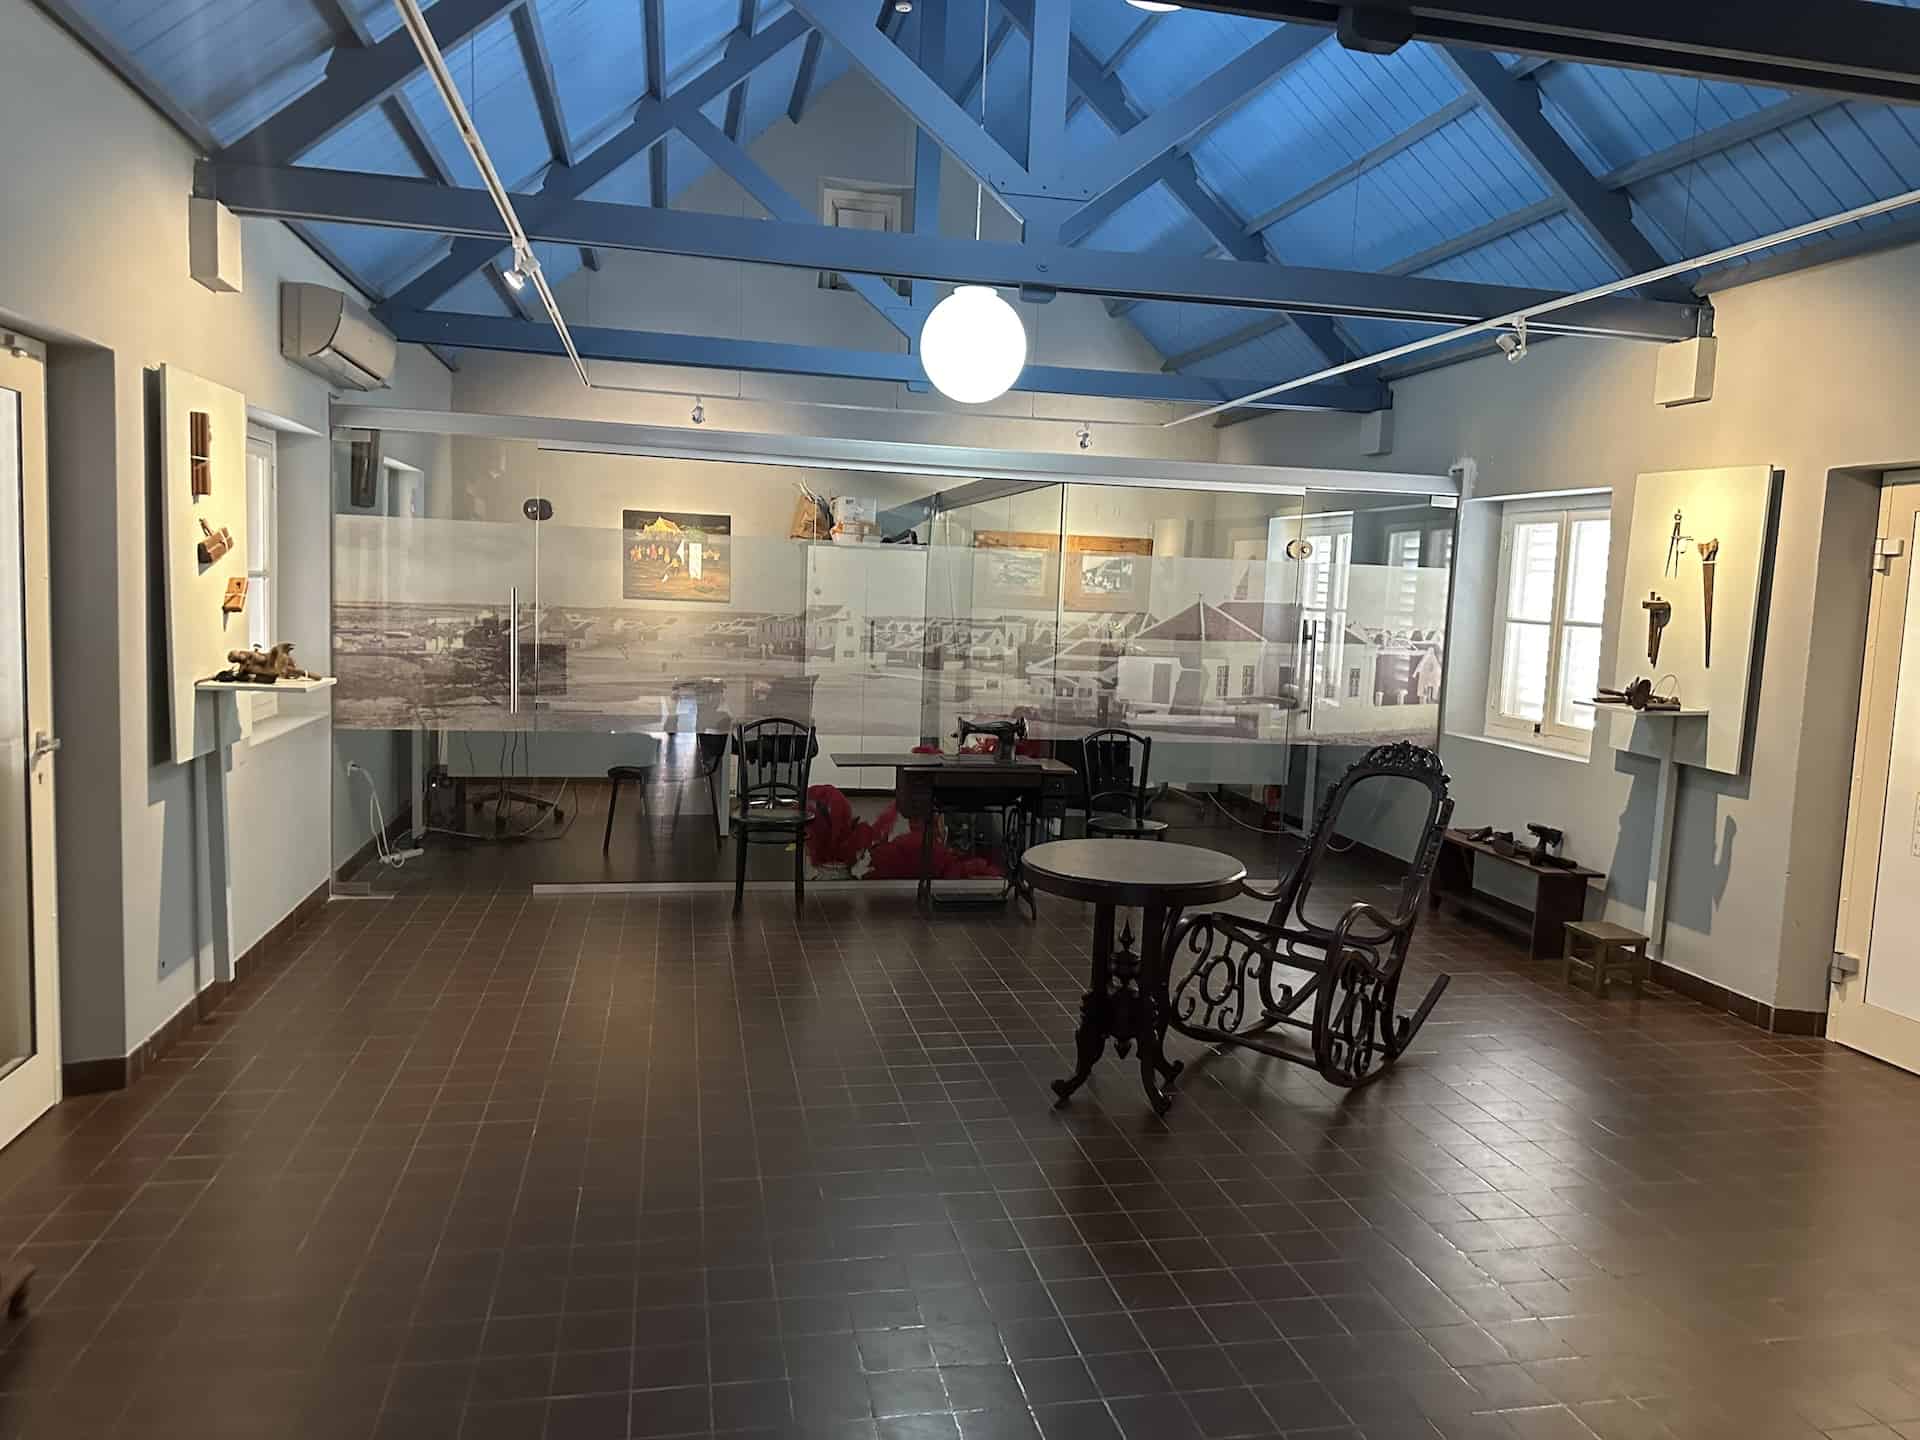 Third gallery at the Historical Museum of Aruba